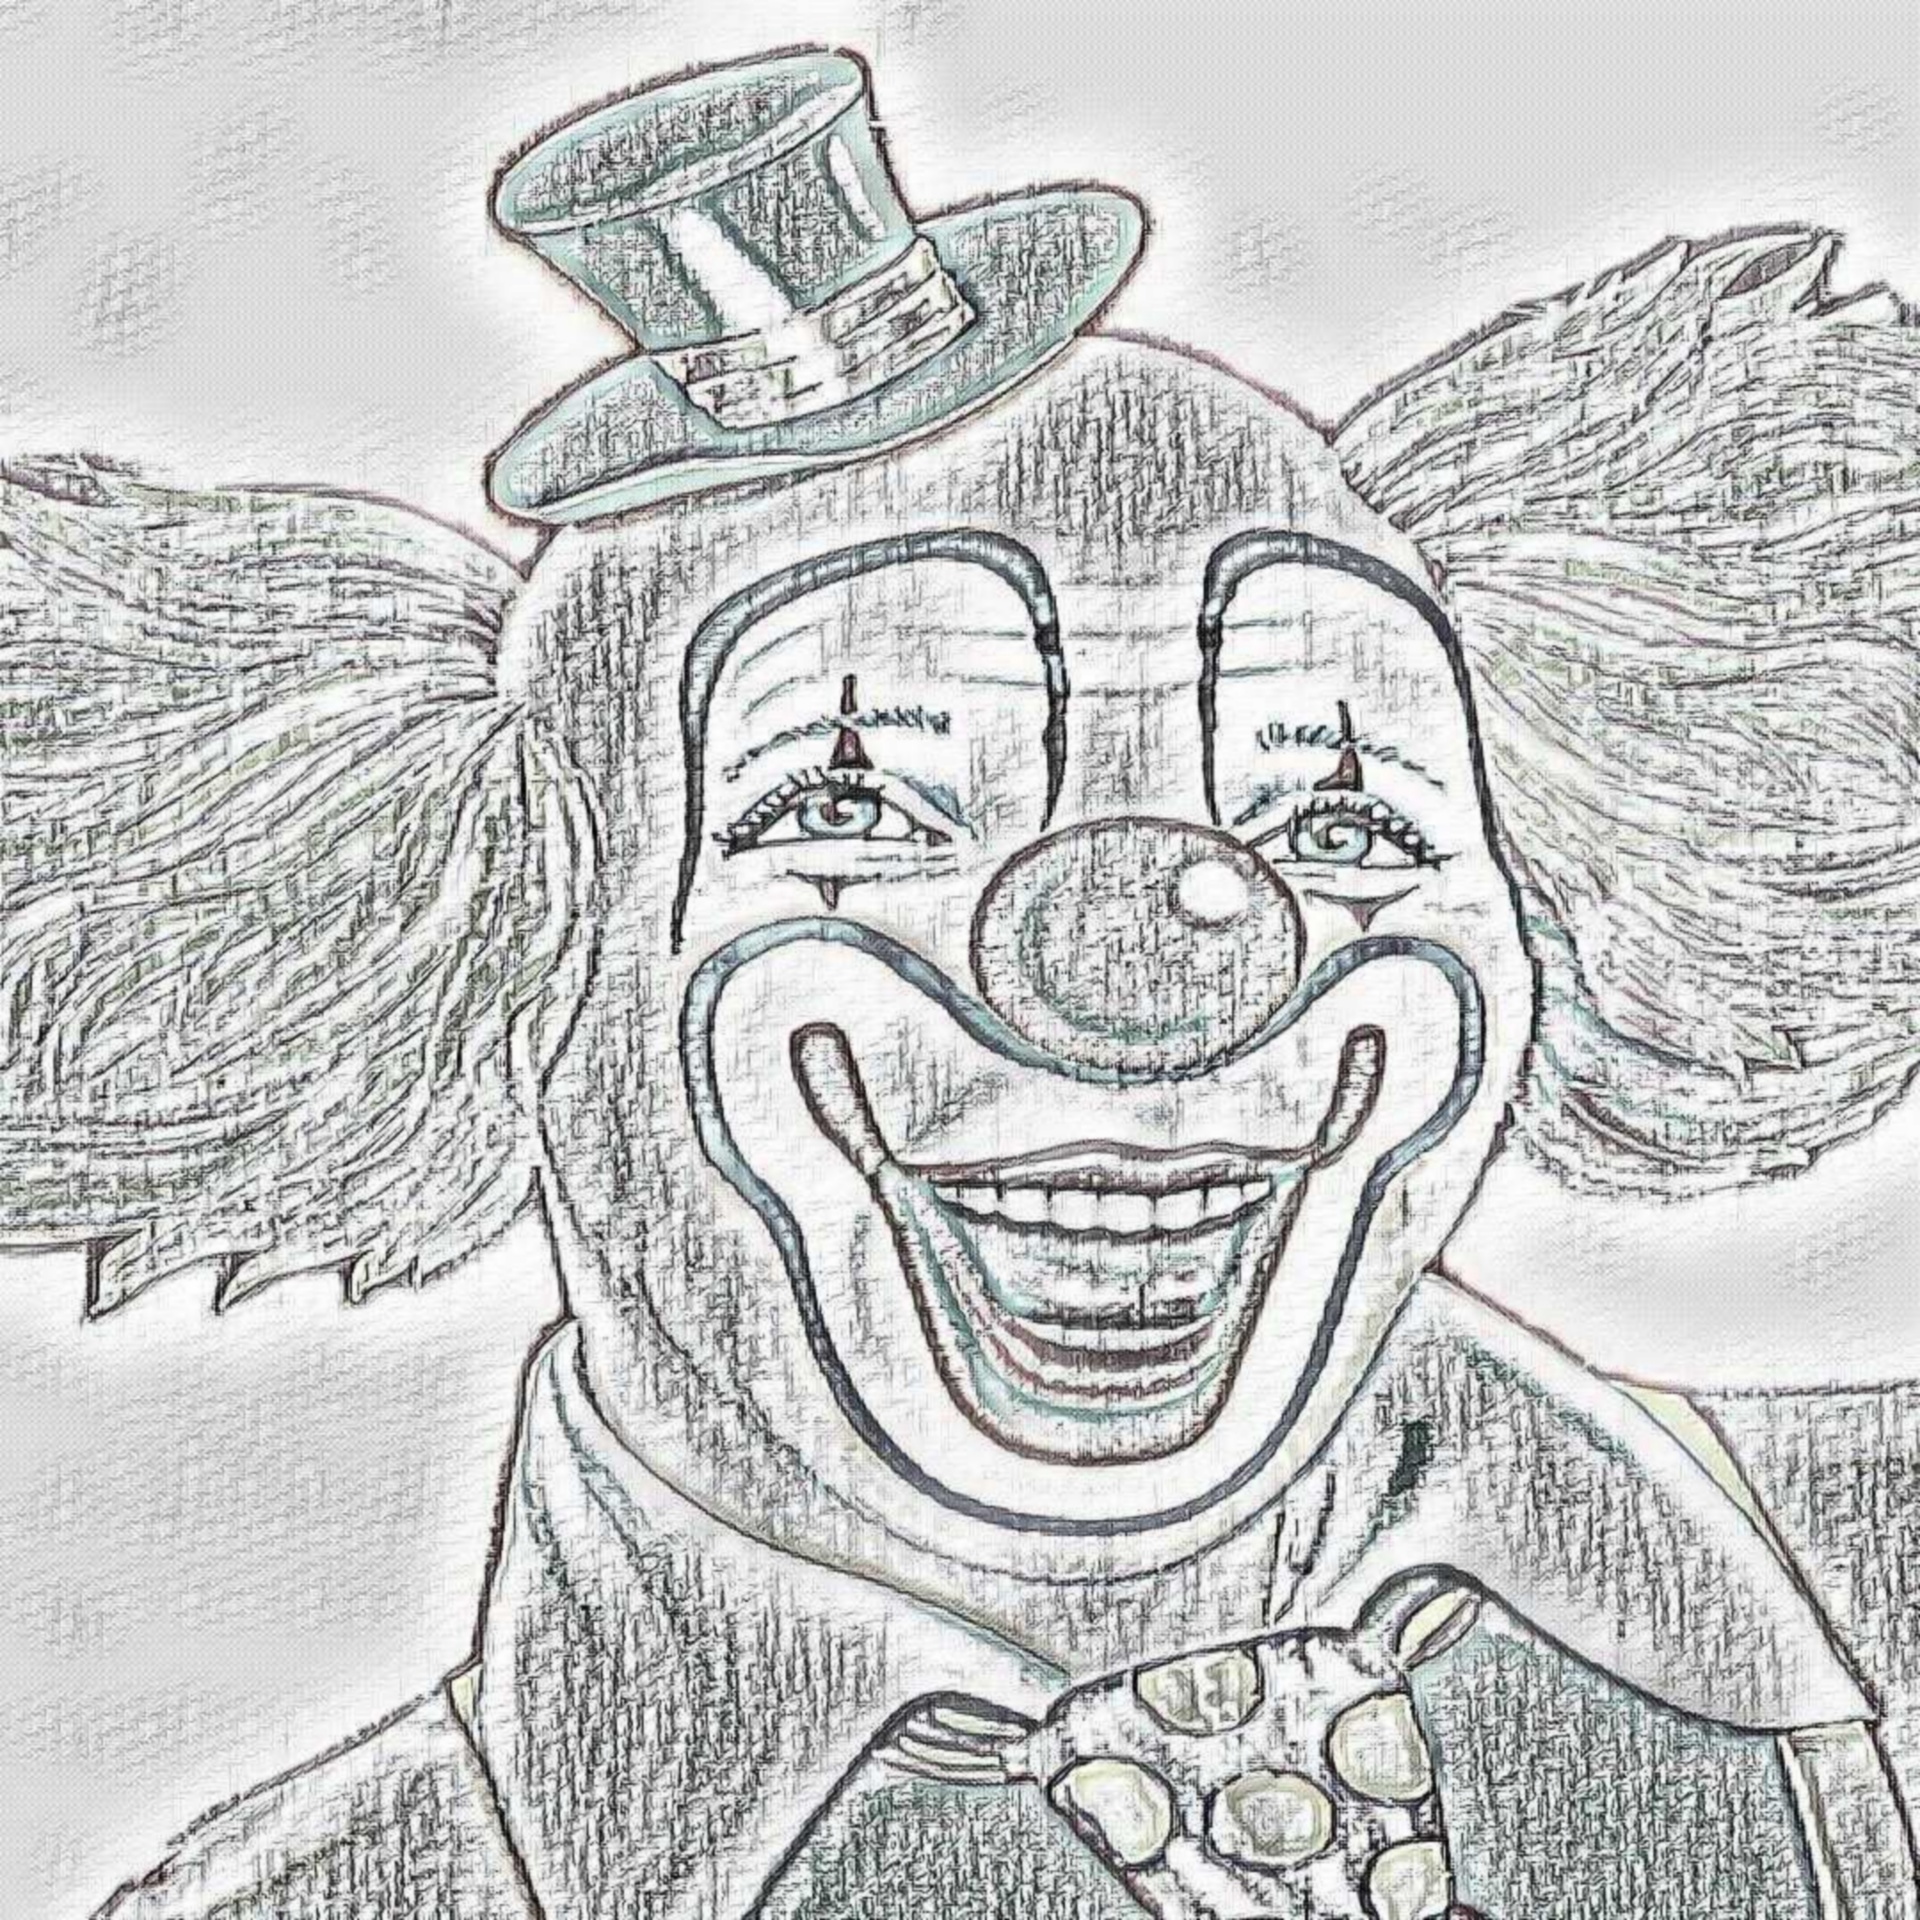 Download Free Photo Of Clown Pencil Drawing Black White From Needpix Com